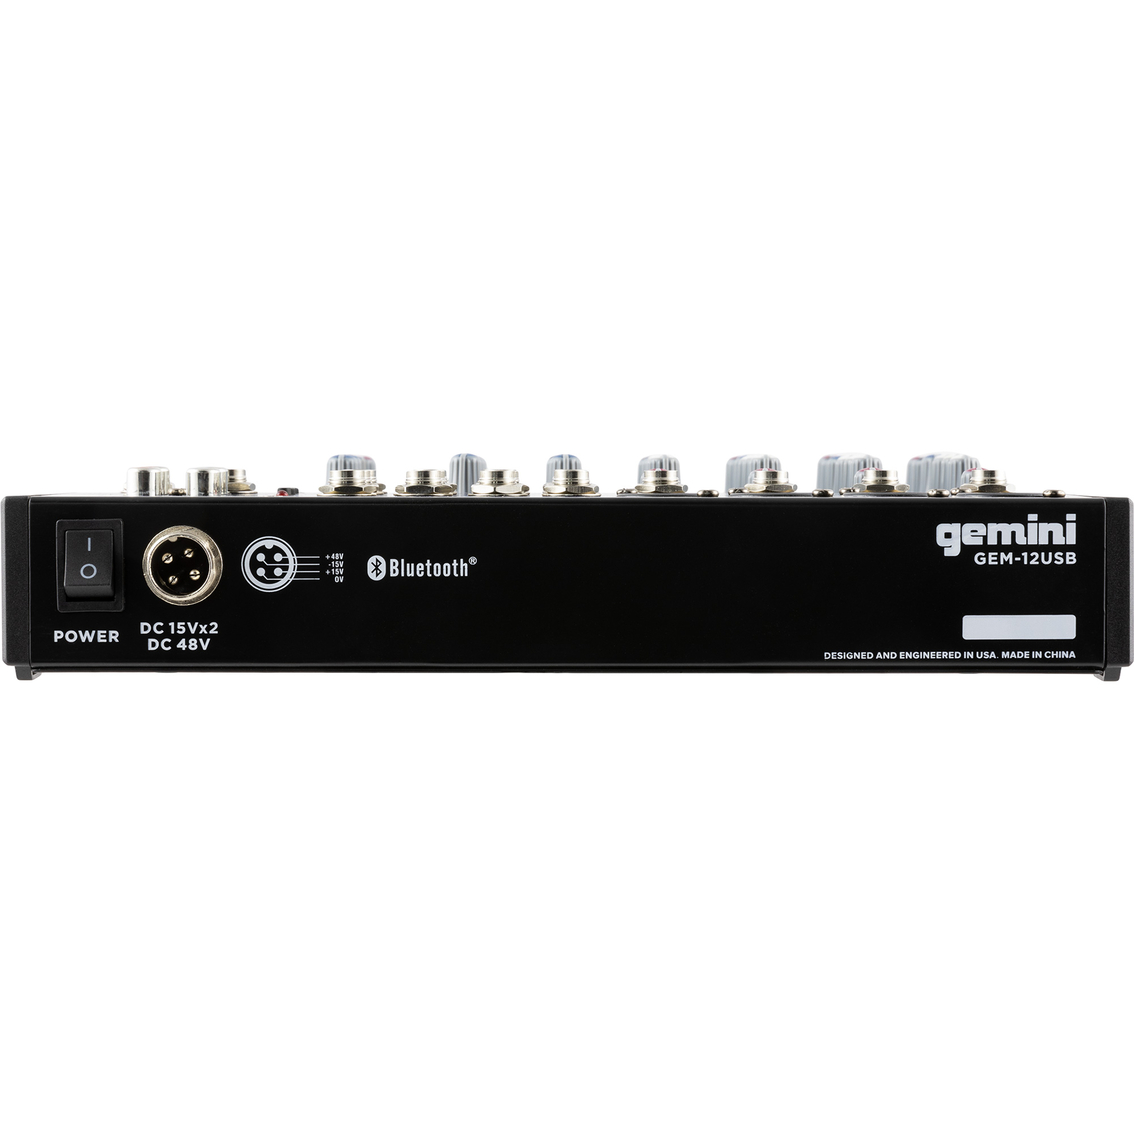 Gemini GEM-12USB 12-Channel USB and Bluetooth Mixer - Image 2 of 5